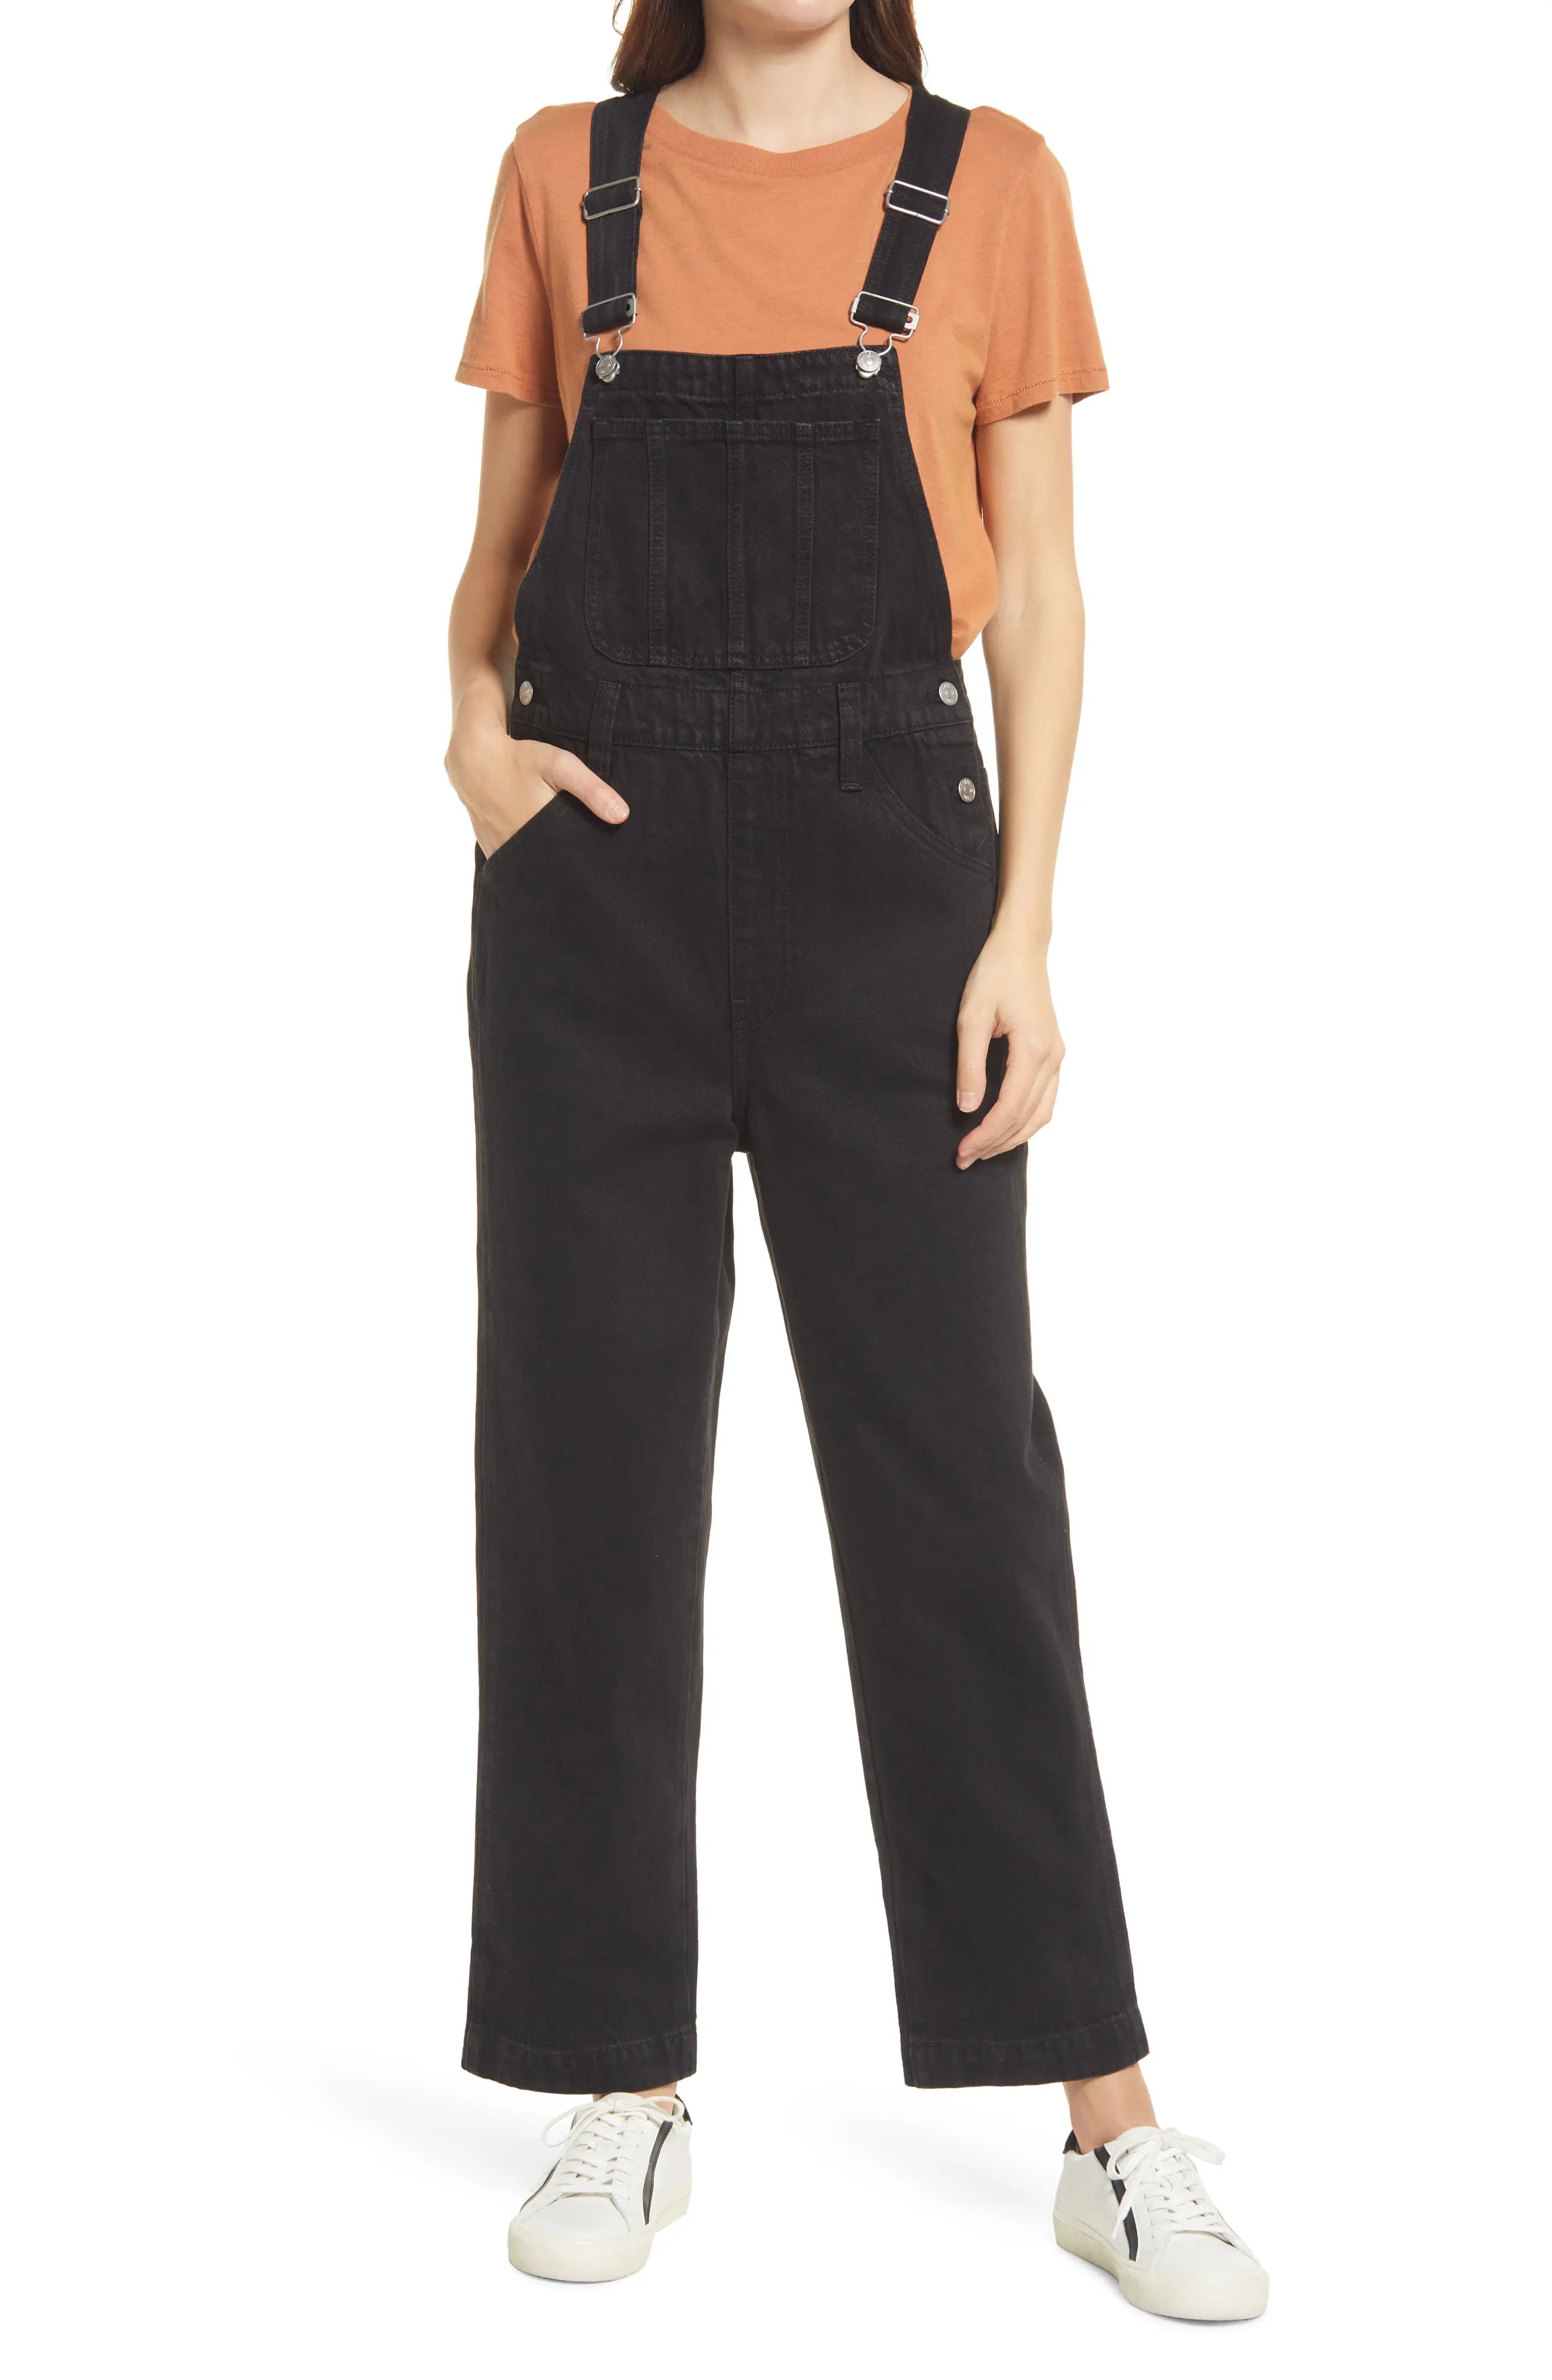 Madewell Straight Leg Overalls in Lunar Wash at Nordstrom, Size X-Large | Nordstrom